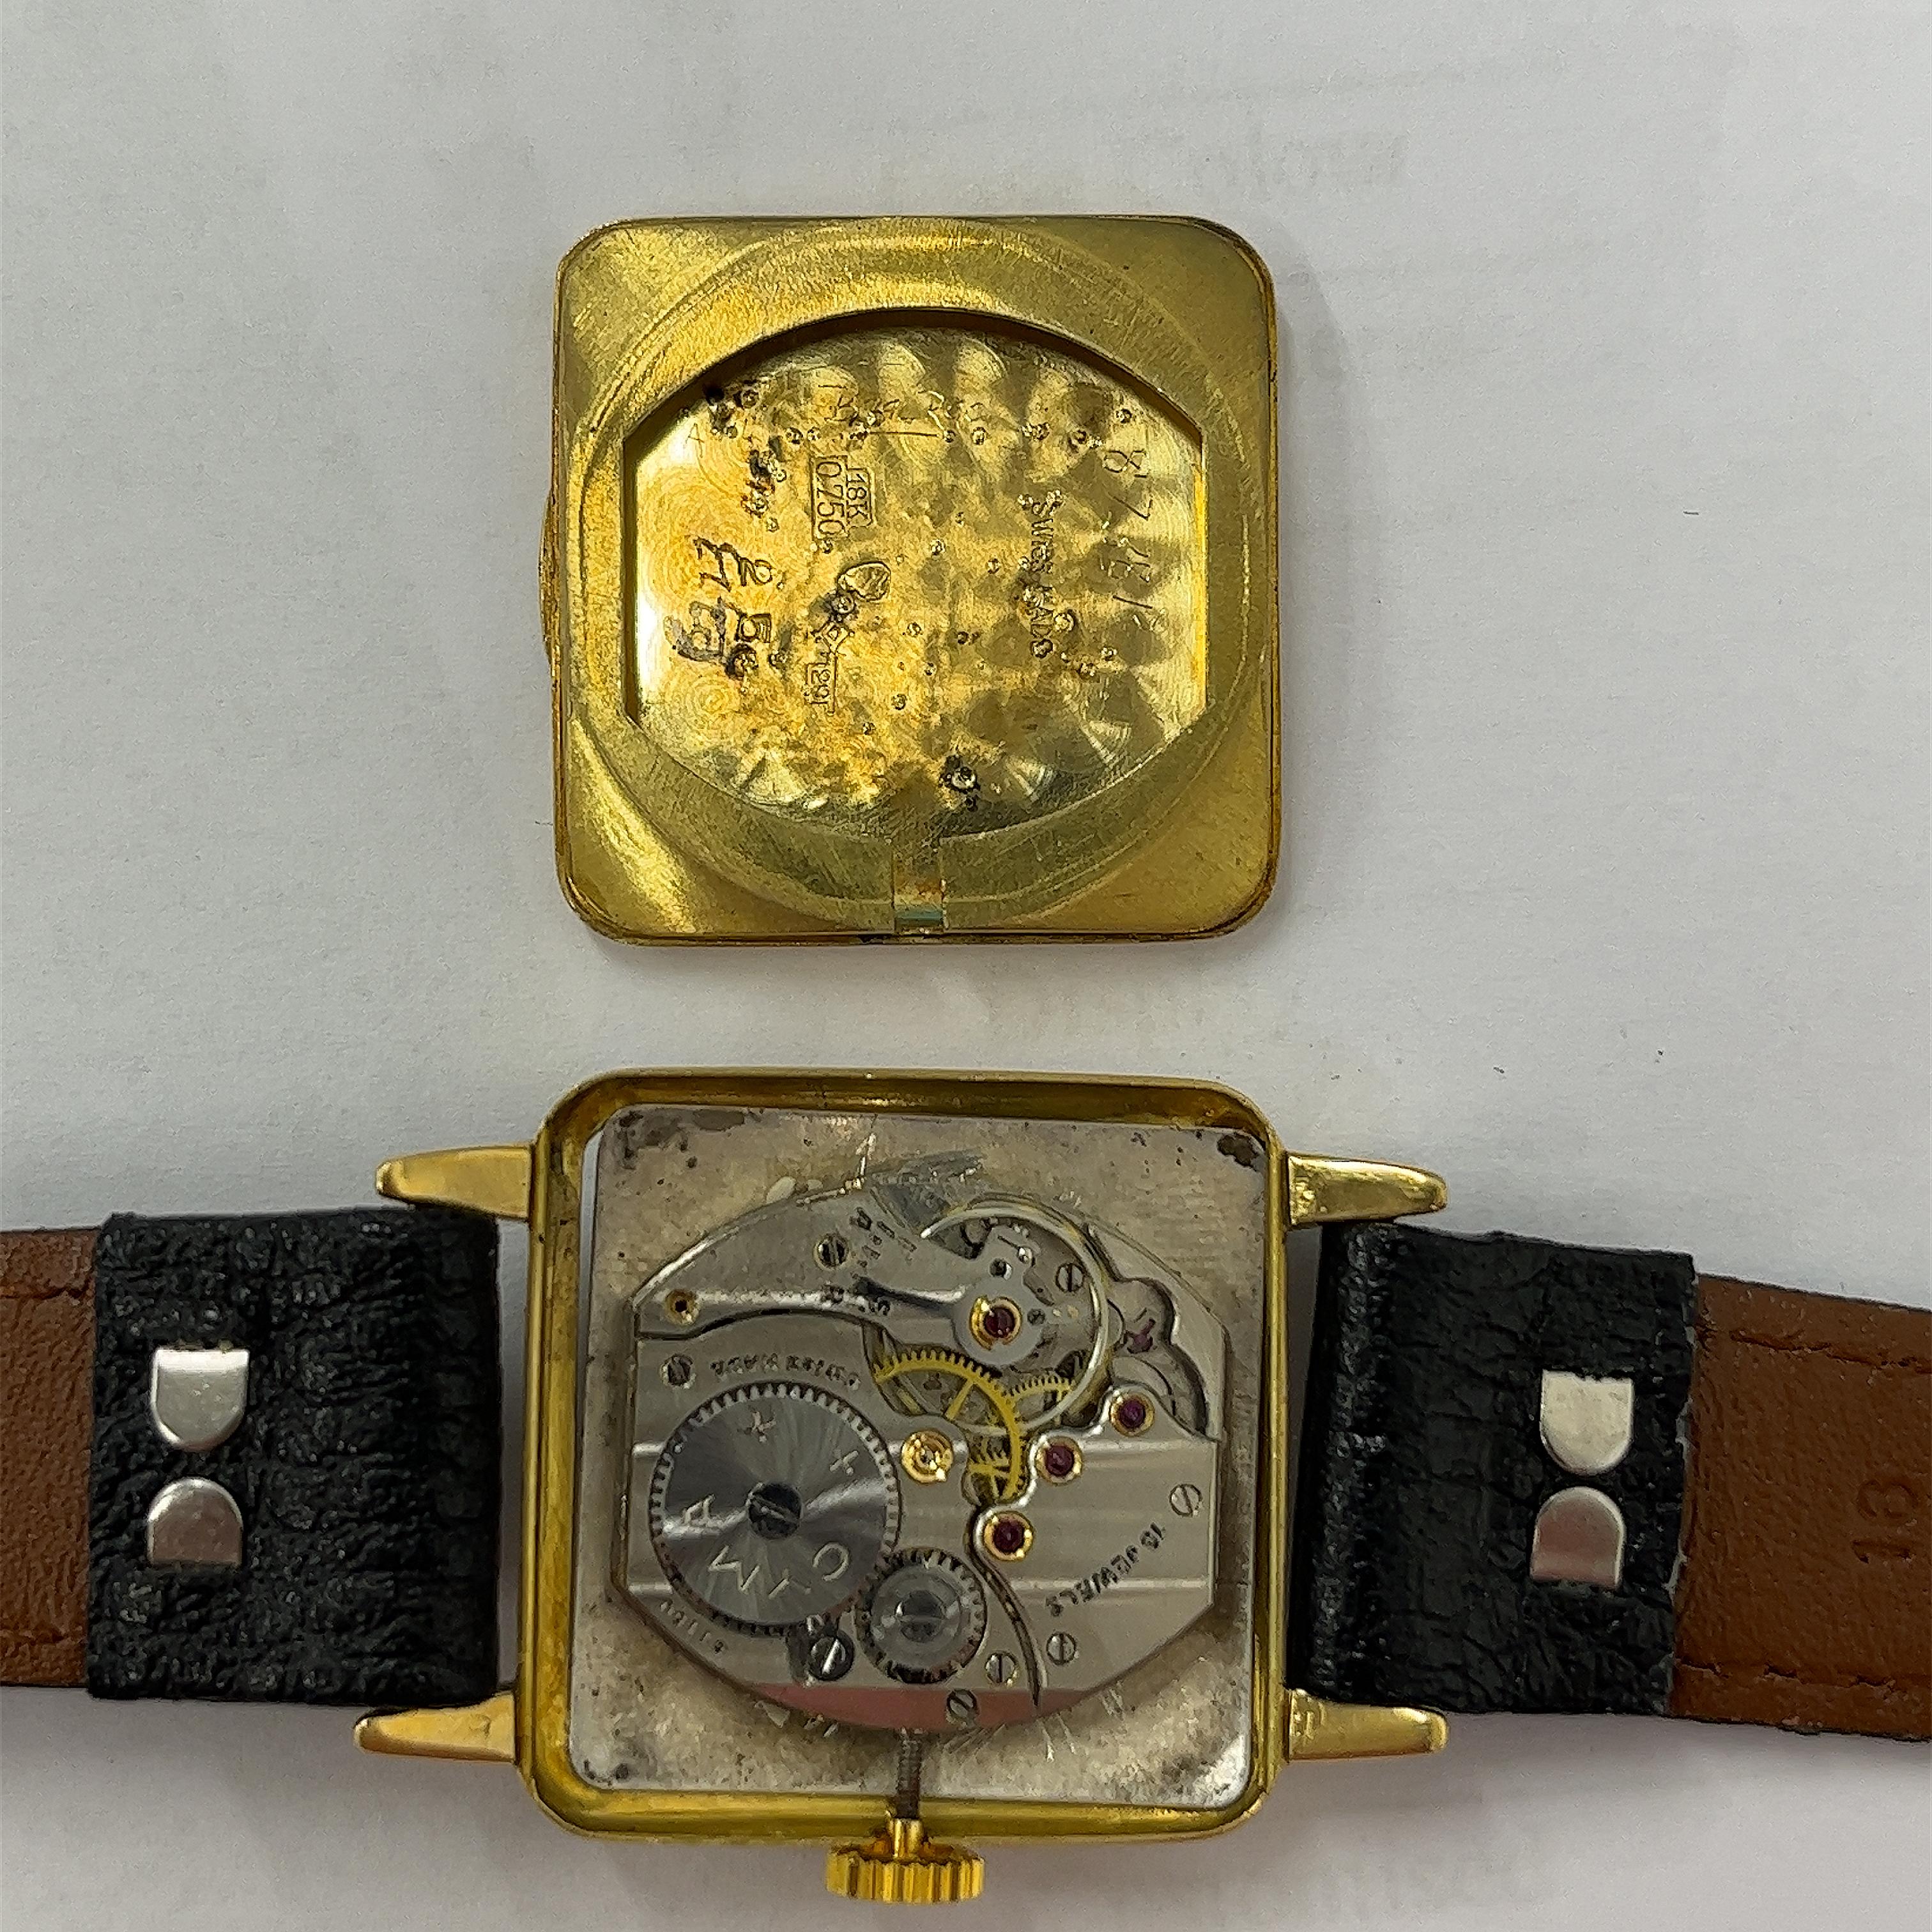 18ct Yellow Gents Gold Vintage Cyma Square Watch in full working condition.

Total Weight of Watch: 27.2g
Case size: 26mm x 26mm
Movement: G1150
Reference number: 8738R